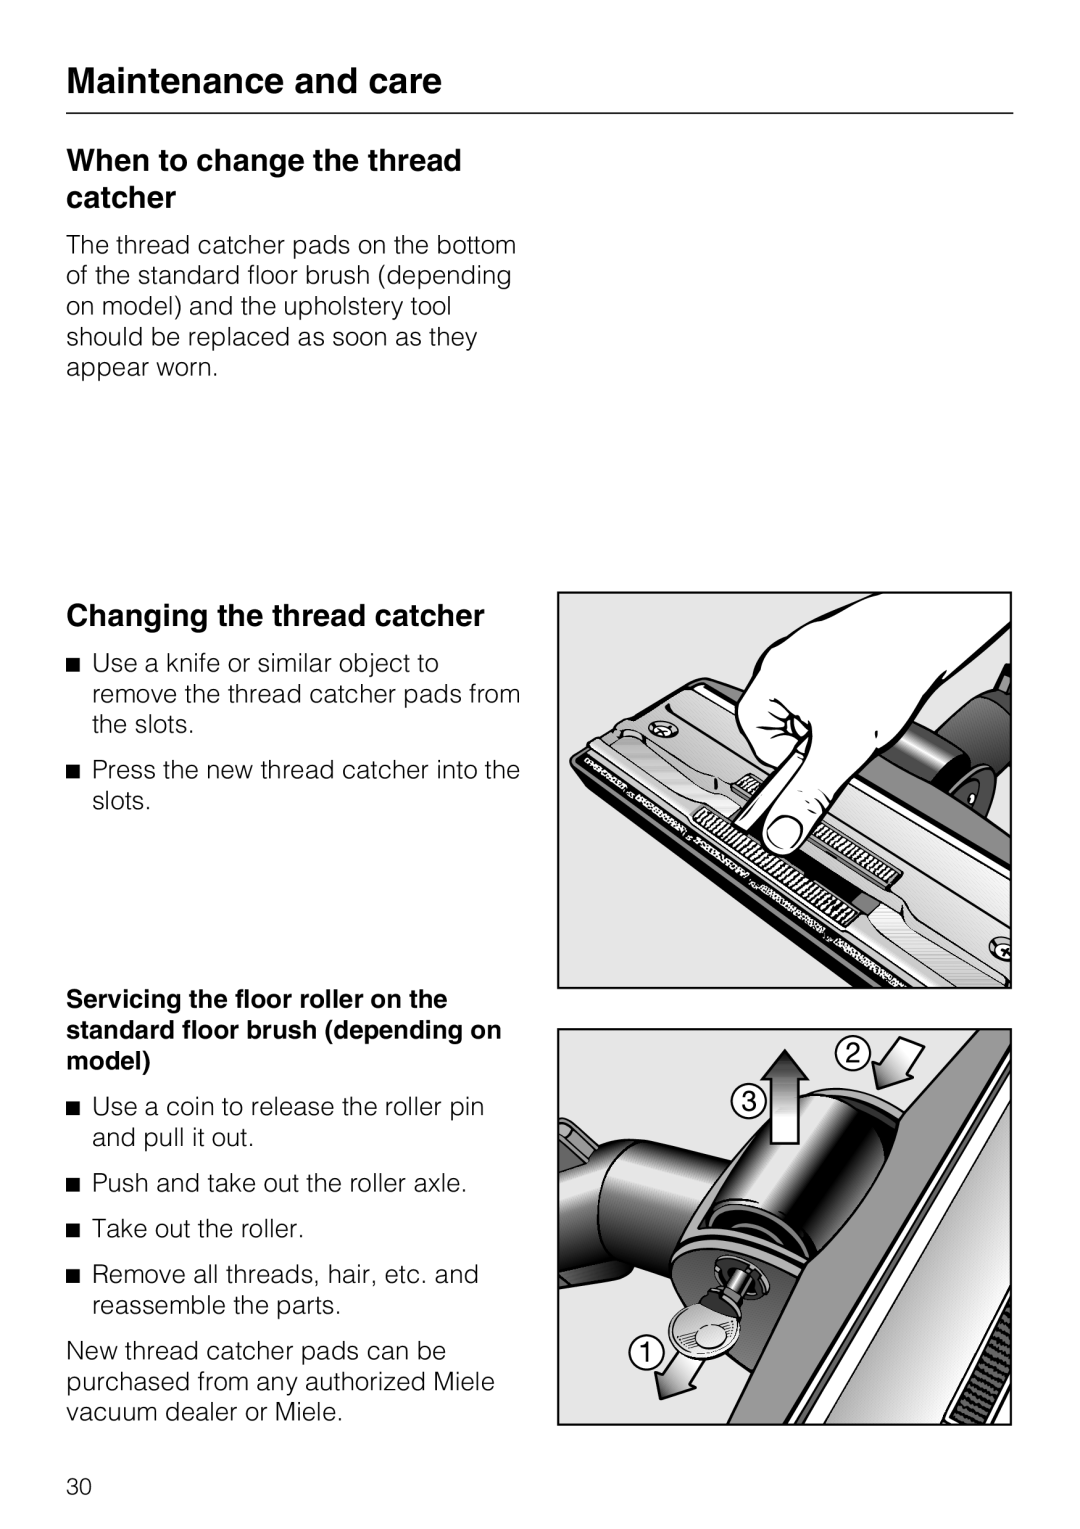 Miele S5981 operating instructions When to change the thread catcher, Changing the thread catcher, Maintenance and care 